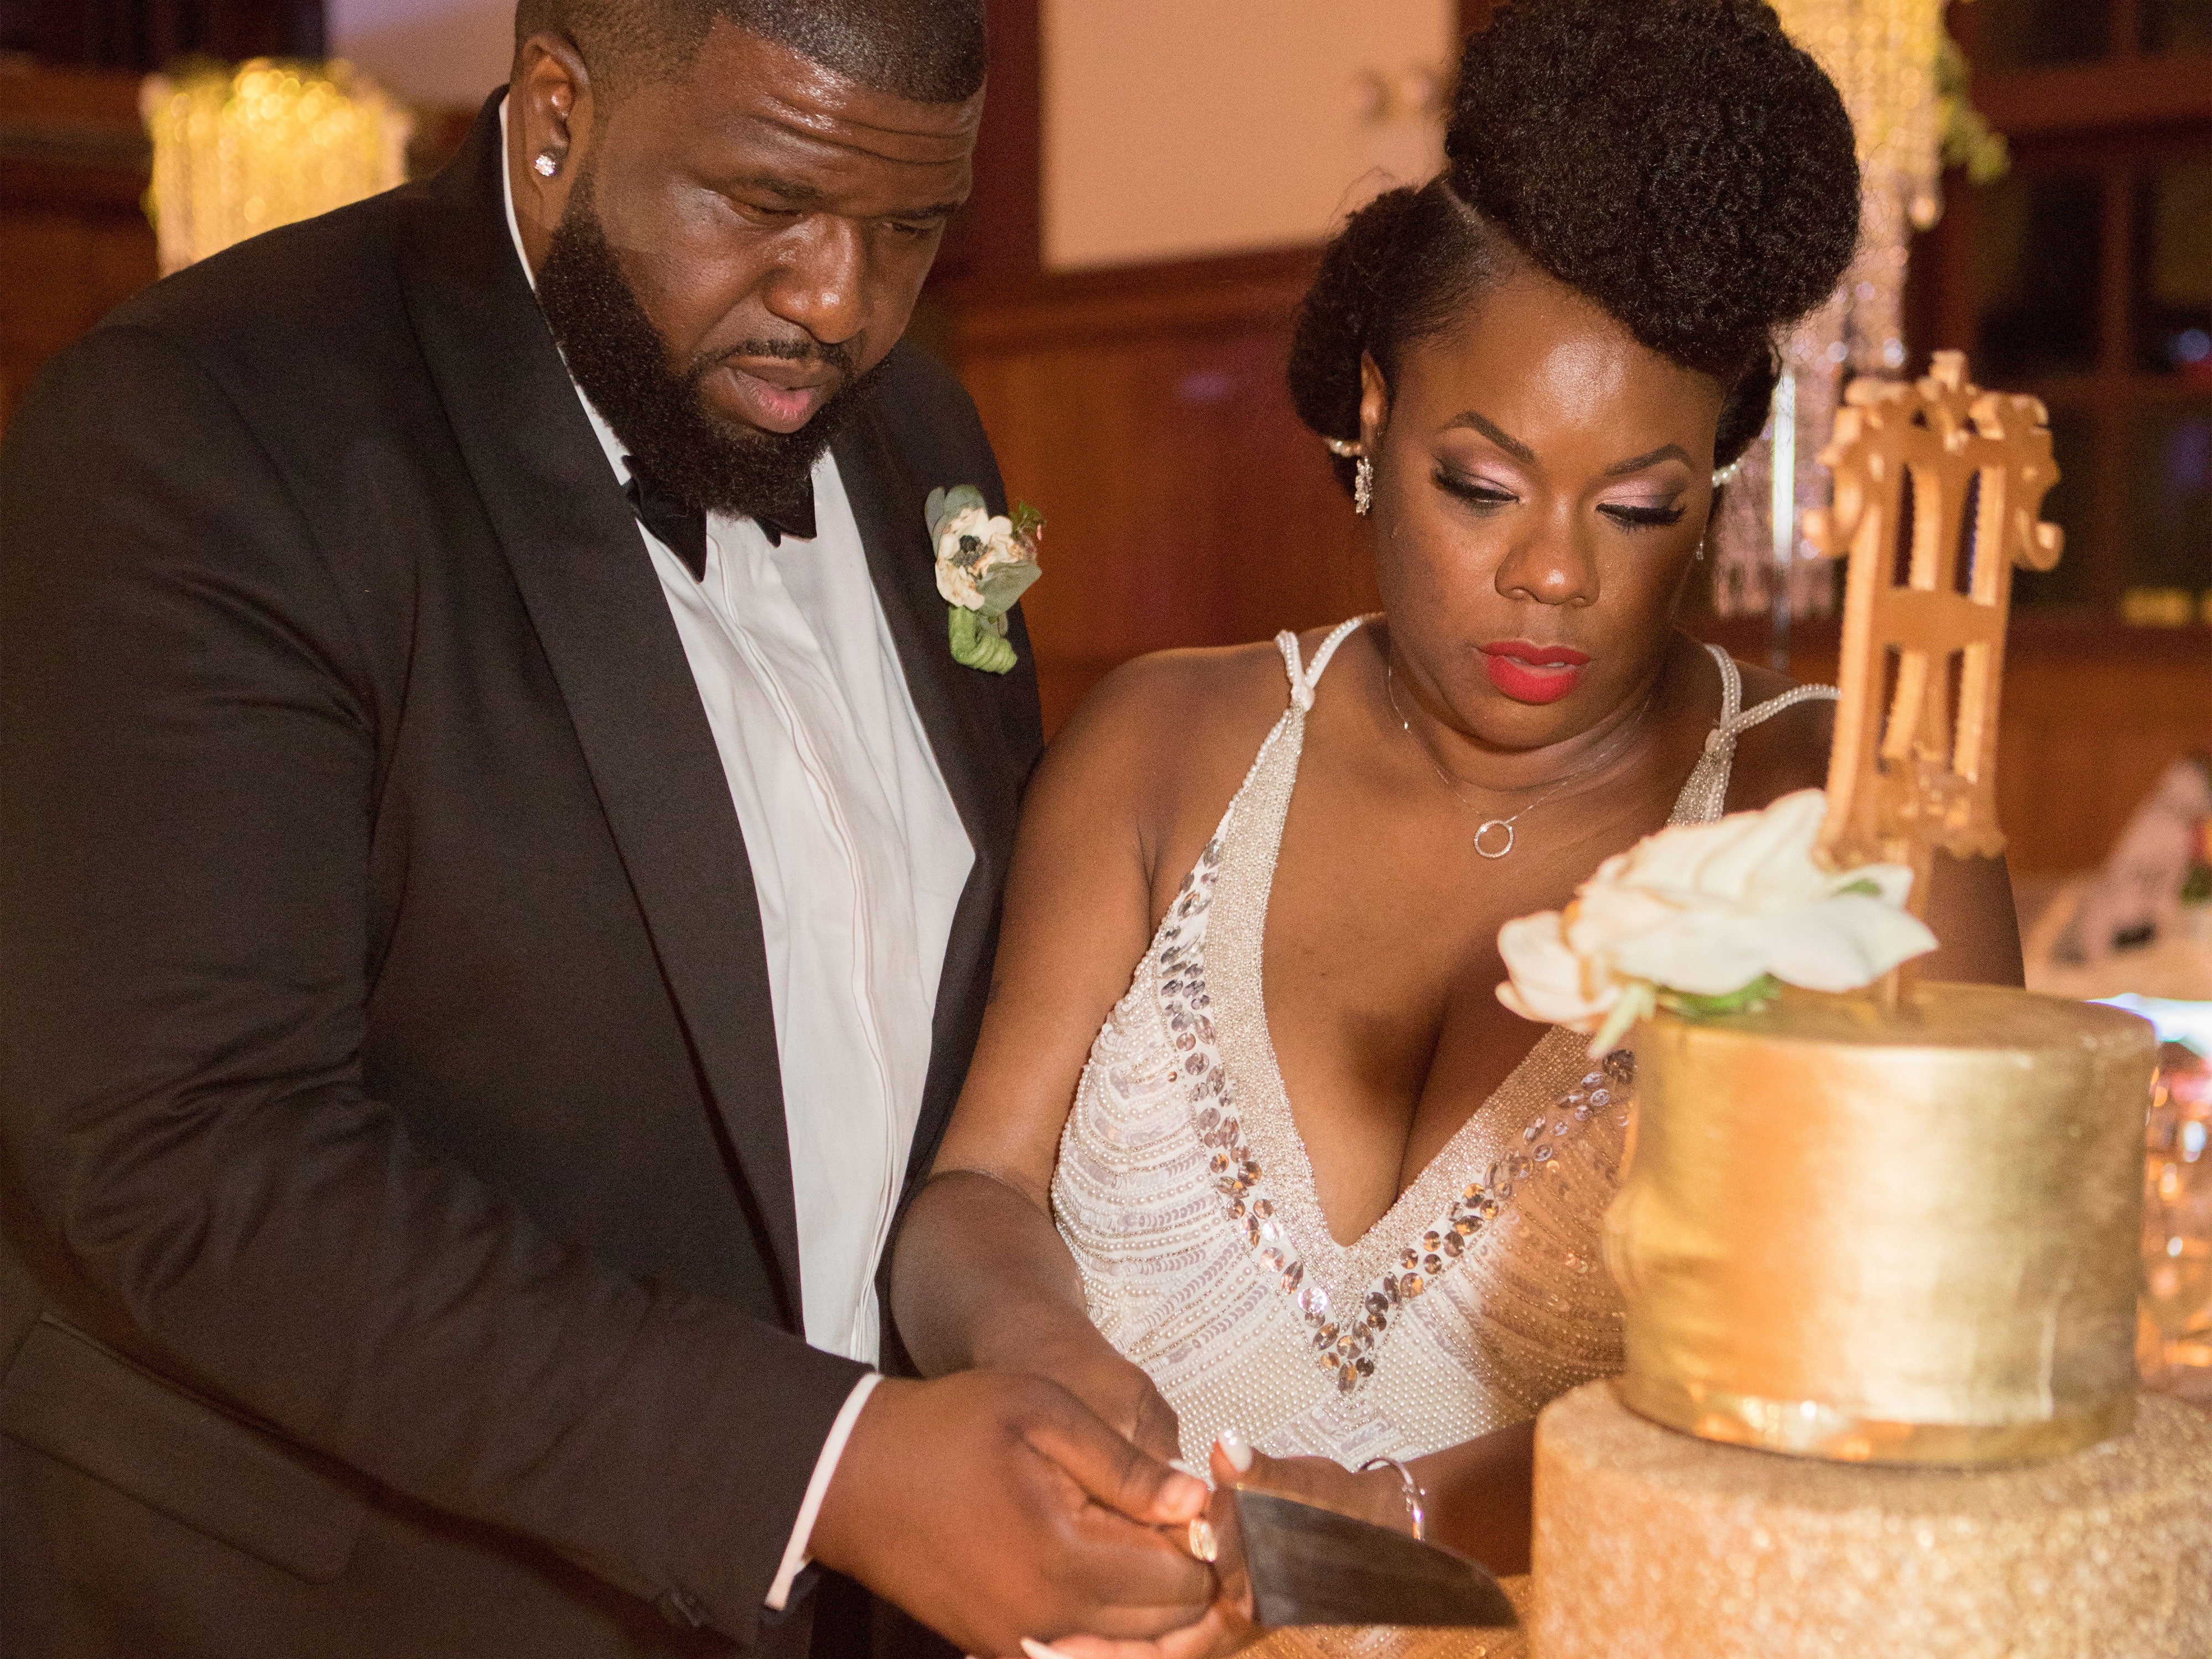 Bridal Bliss: A Round of Applause For Tuwisha and Harold's Renaissance Wedding Day